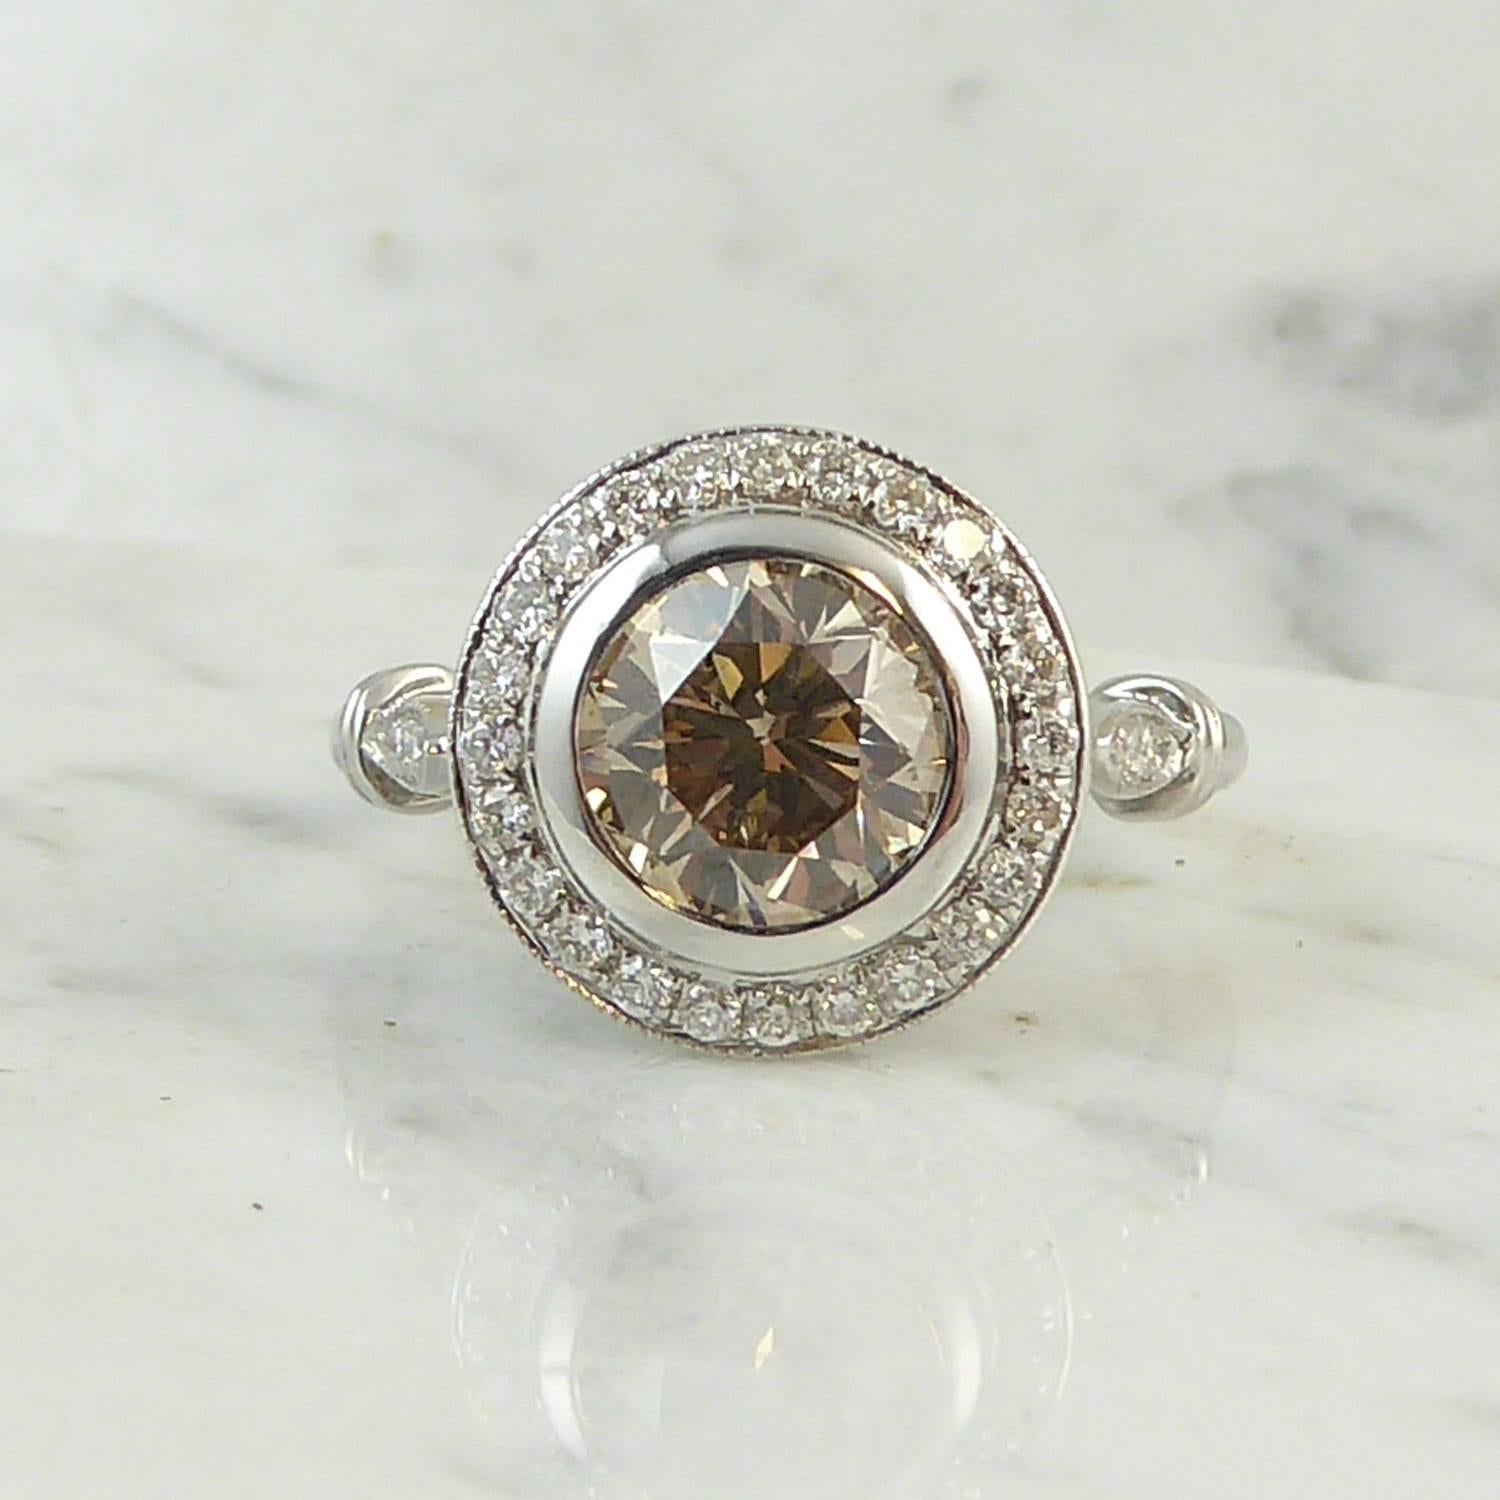 A fancy light yellowish brown diamond set to the centre of a halo of white  diamonds creates a very pleasing colour contrast to this cluster ring.  The fancy diamond is in a white polished rub-over setting to the halo surround of 28 grain set white